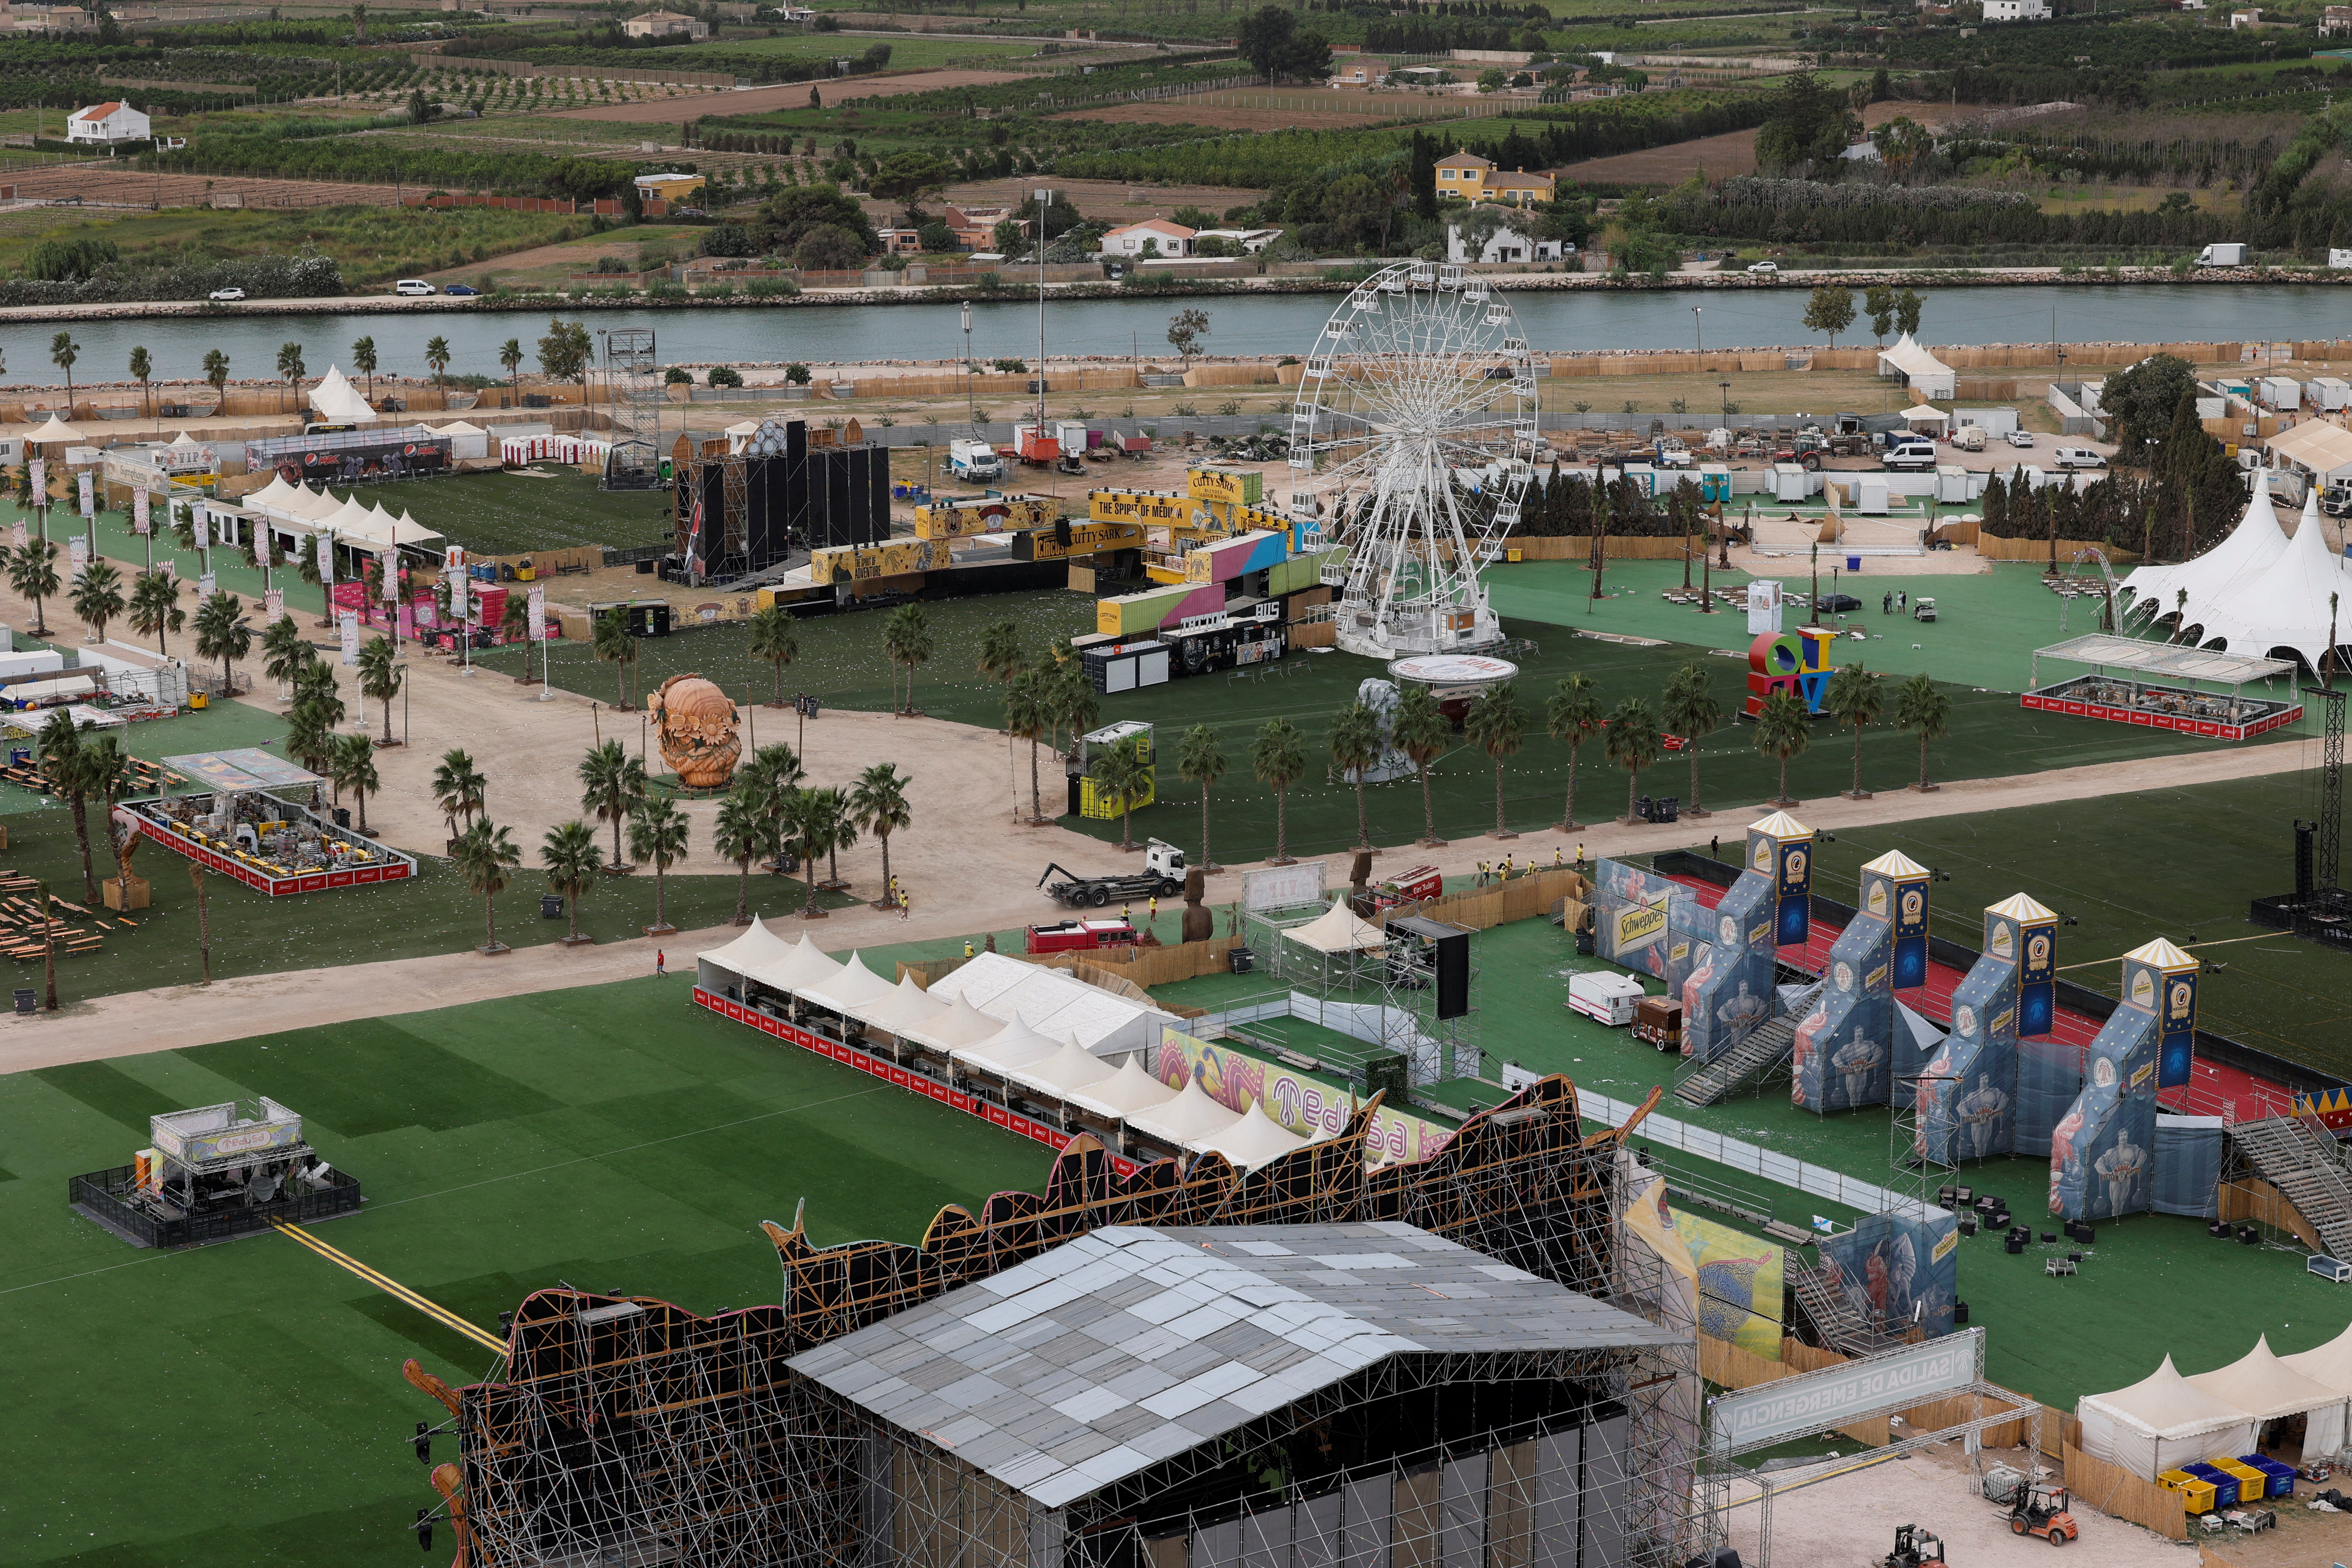 Accident at music festival after strong winds, in Valencia